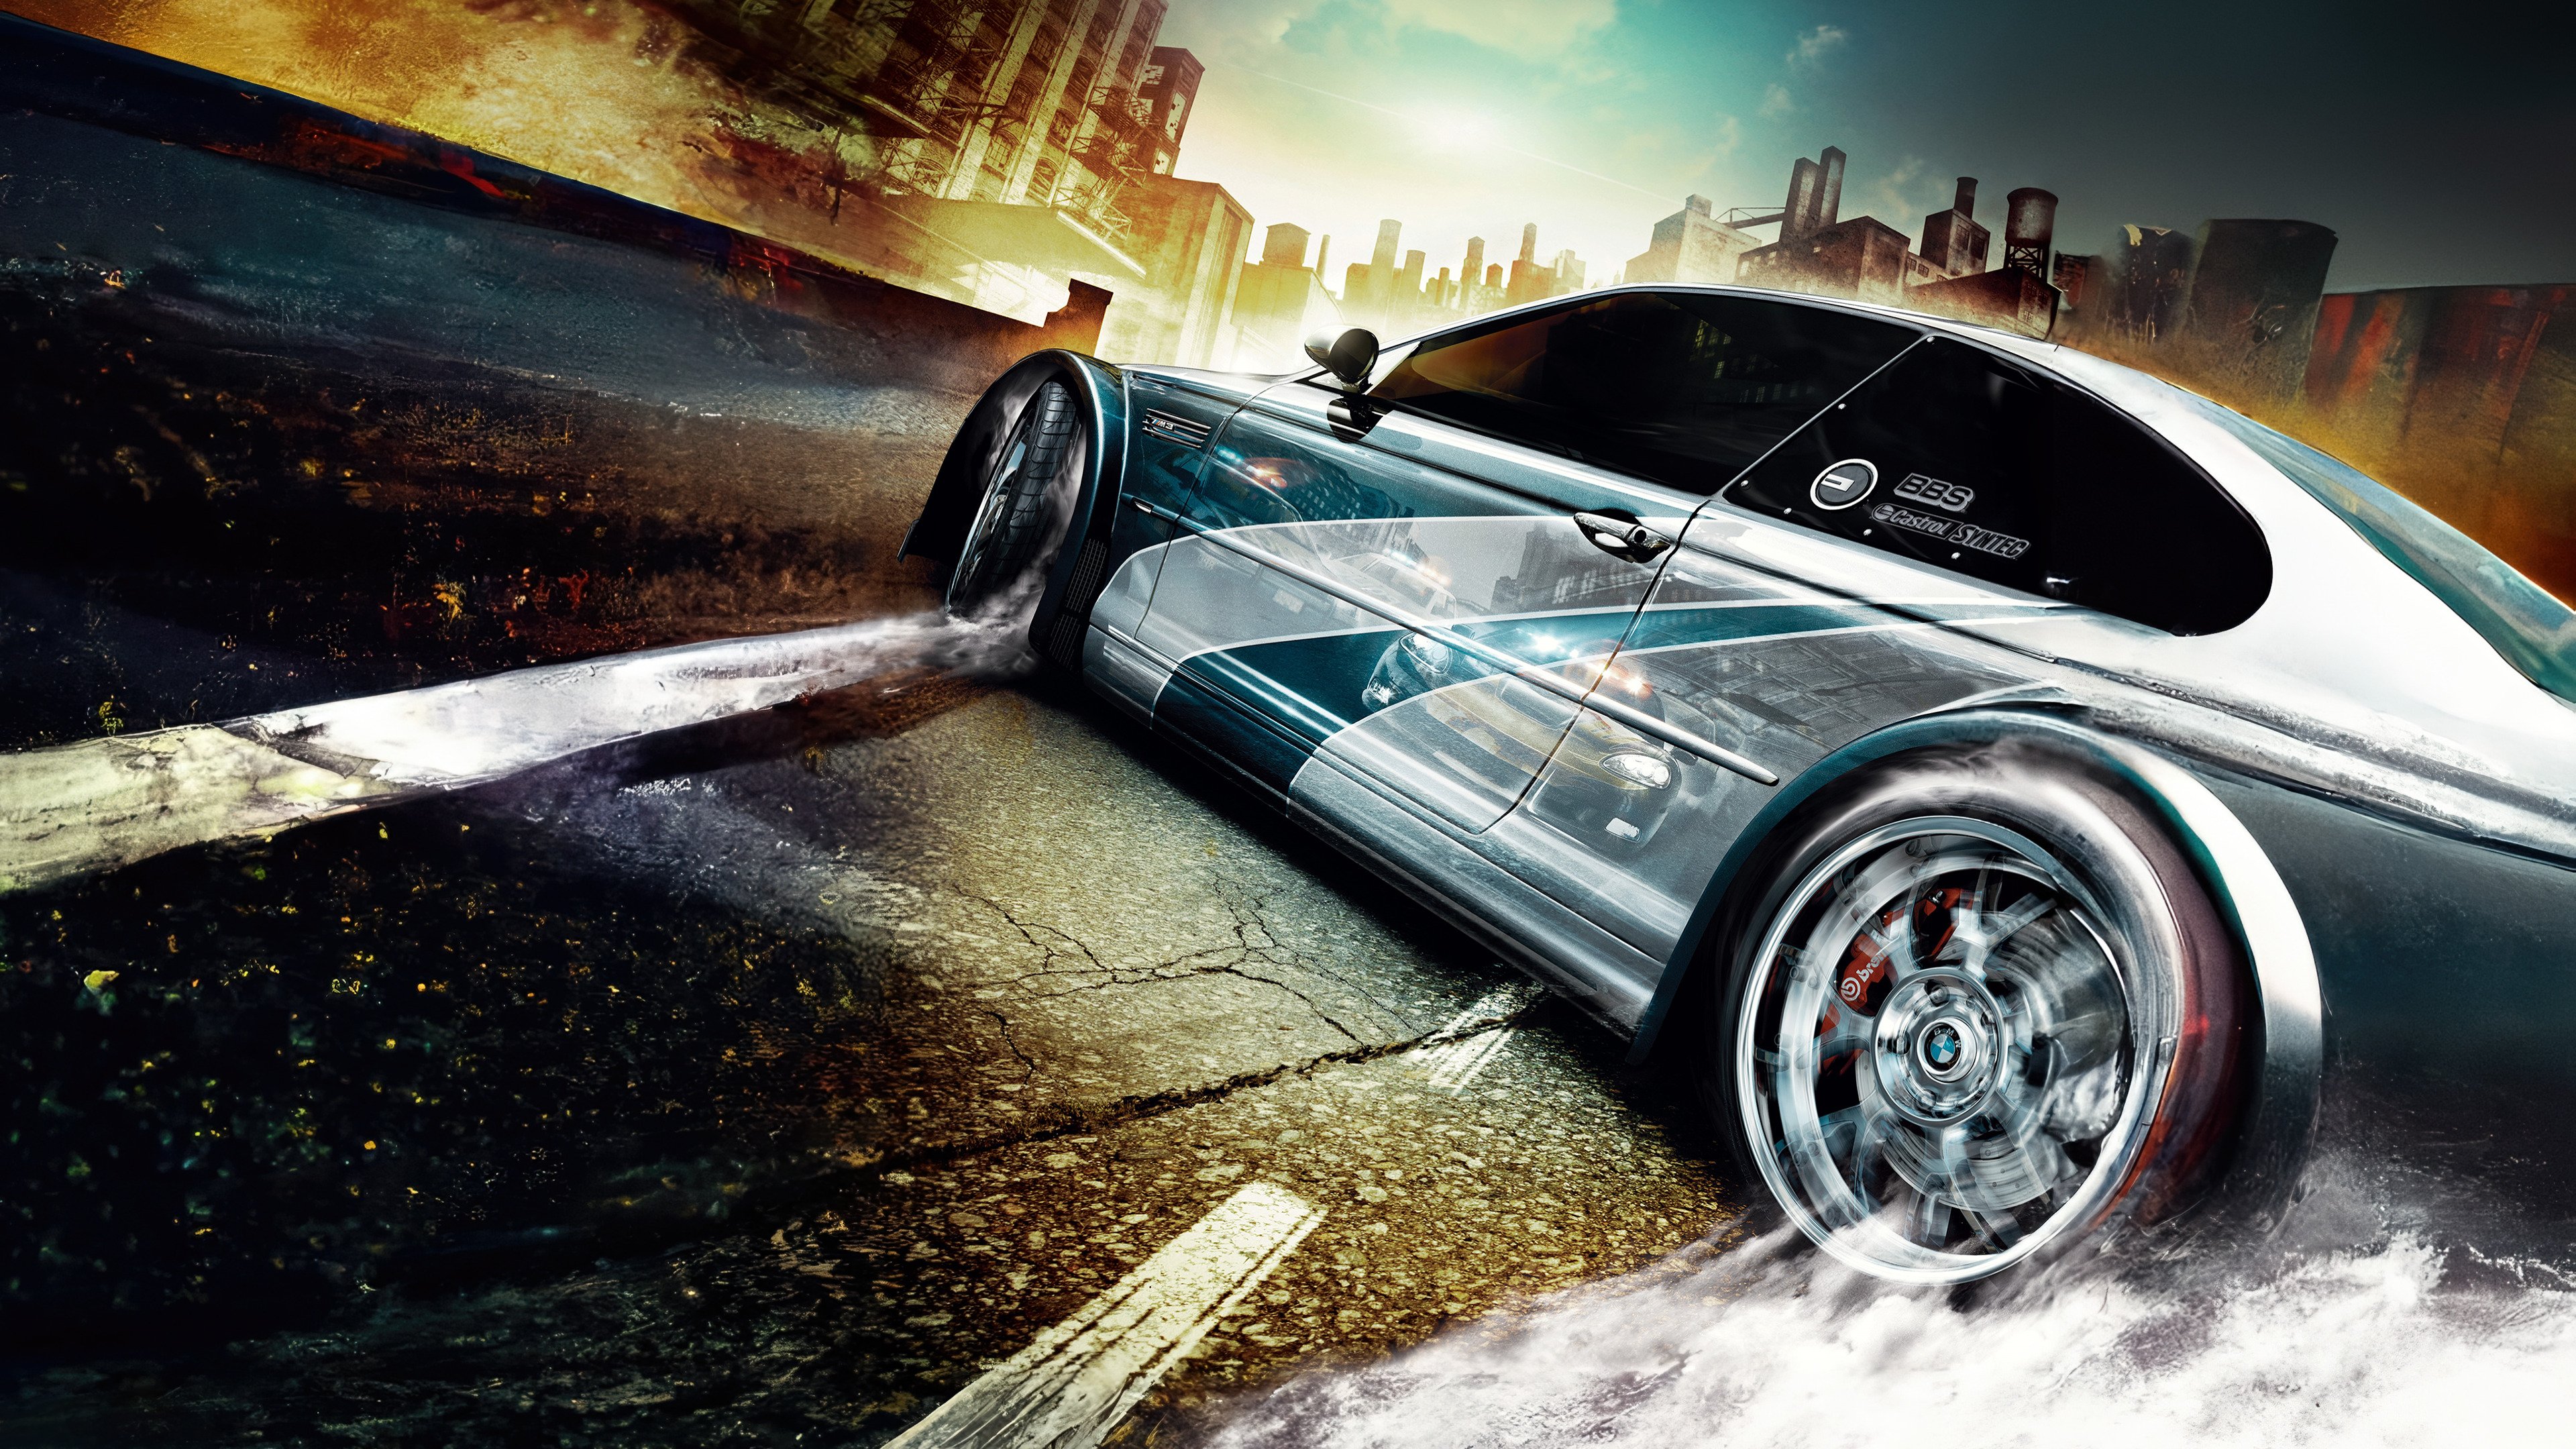 A Need for Speed: Most Wanted remake is coming next year, voice actor ...